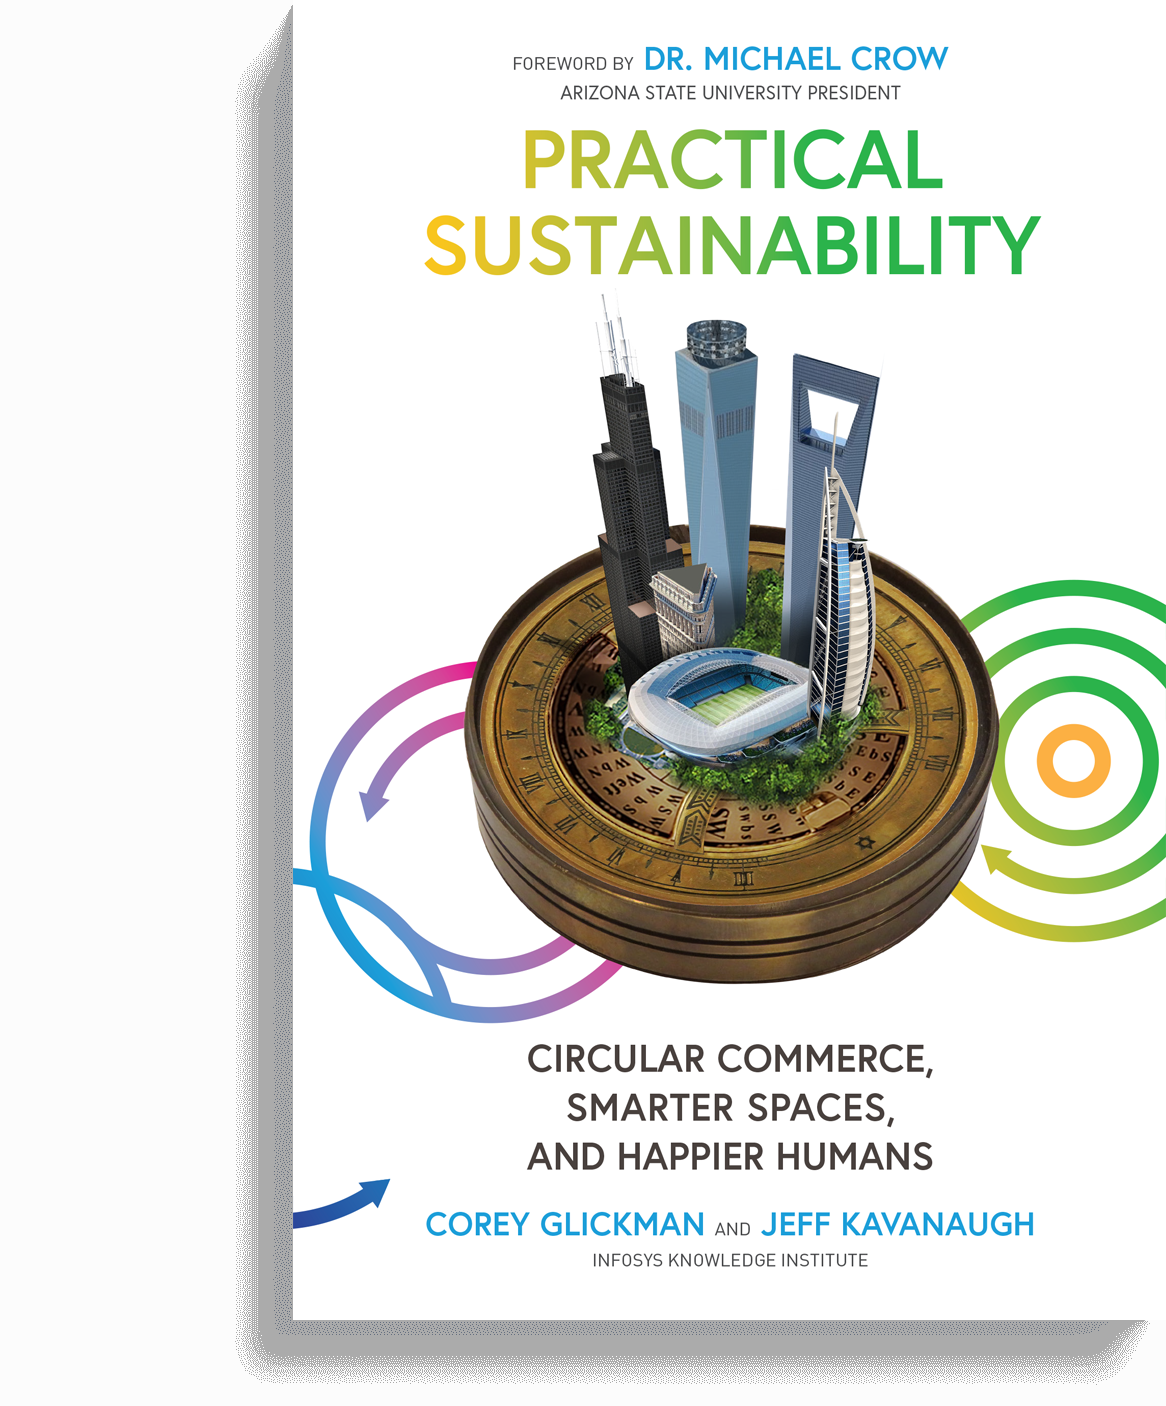 The practical Sustainability